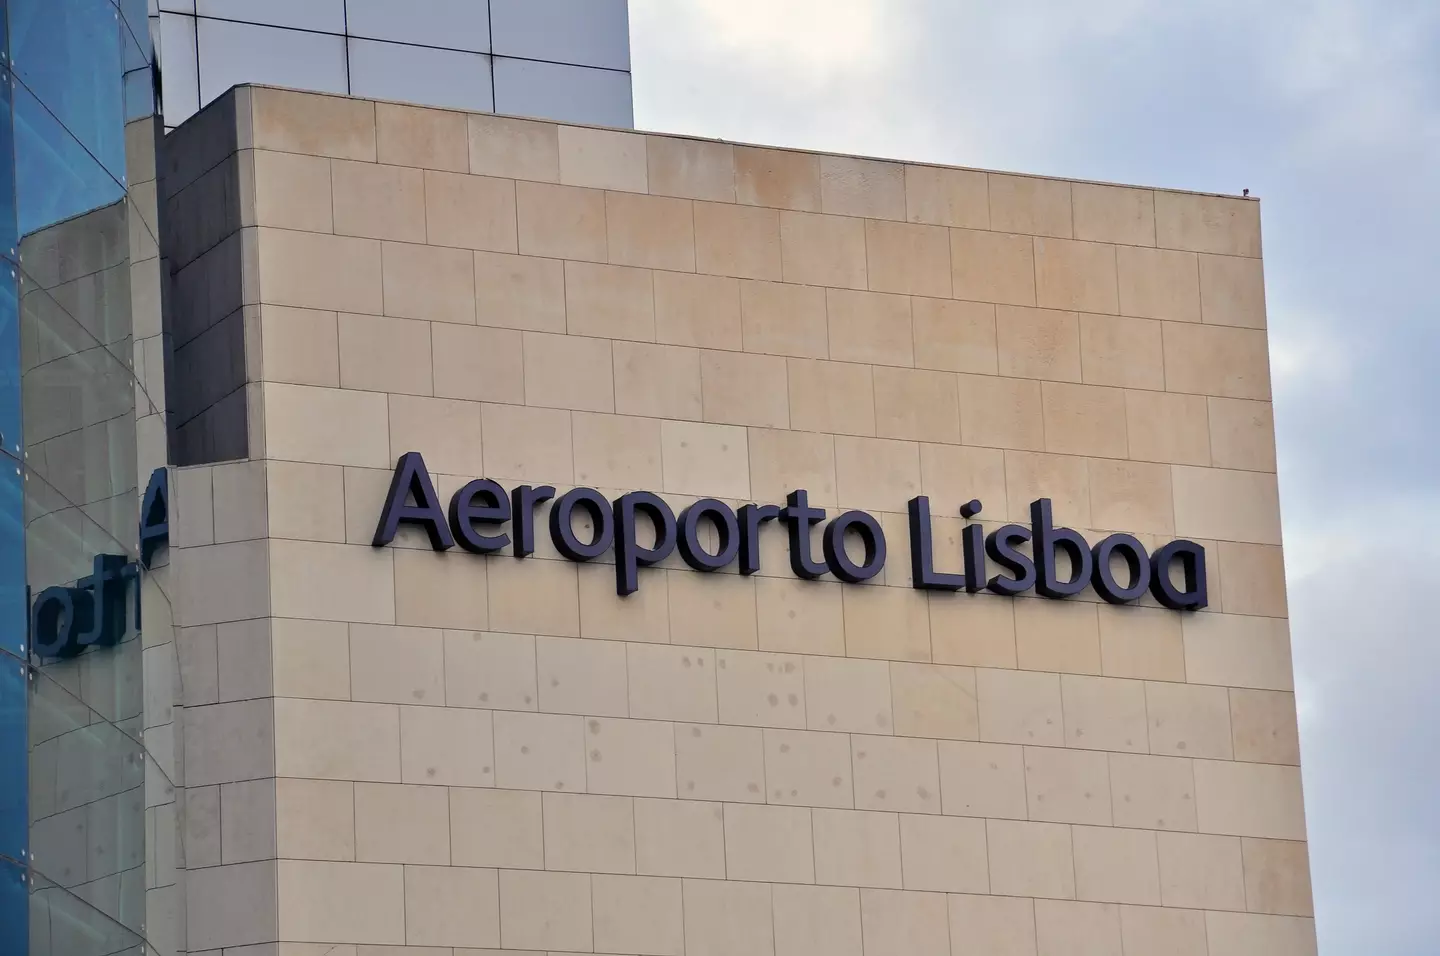 Male was apprehended at Lisbon Airport in May, but has now been released.